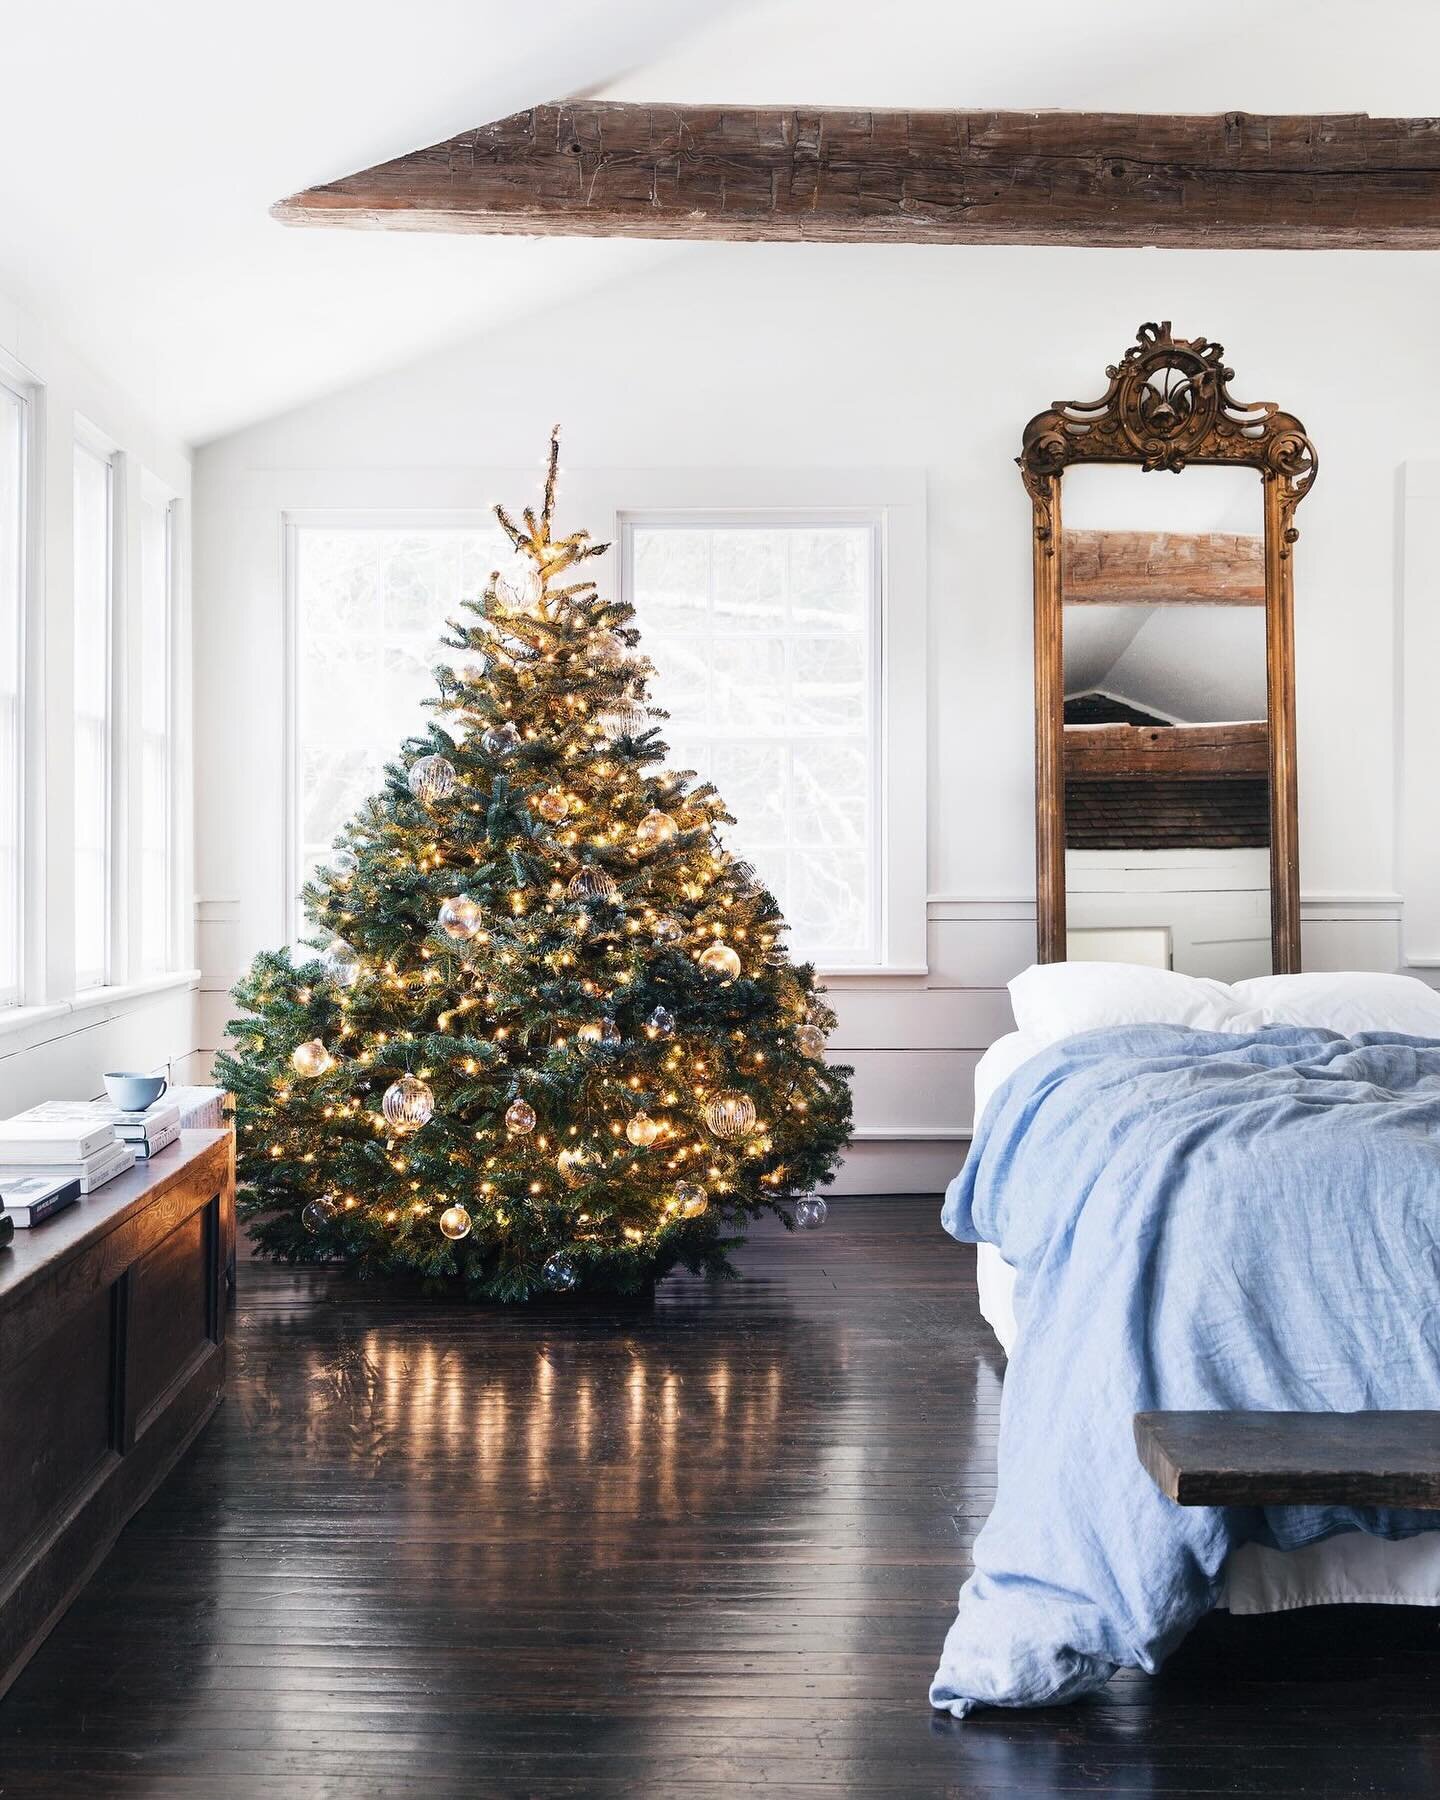 Today on Lonny, the team at @holidayworkroom offers guidance on selecting the perfect tree, honoring your own style, and following the festive fundamentals. Whether you&rsquo;re into a pared back Scandinavian look or an over the top ornament-clad tre